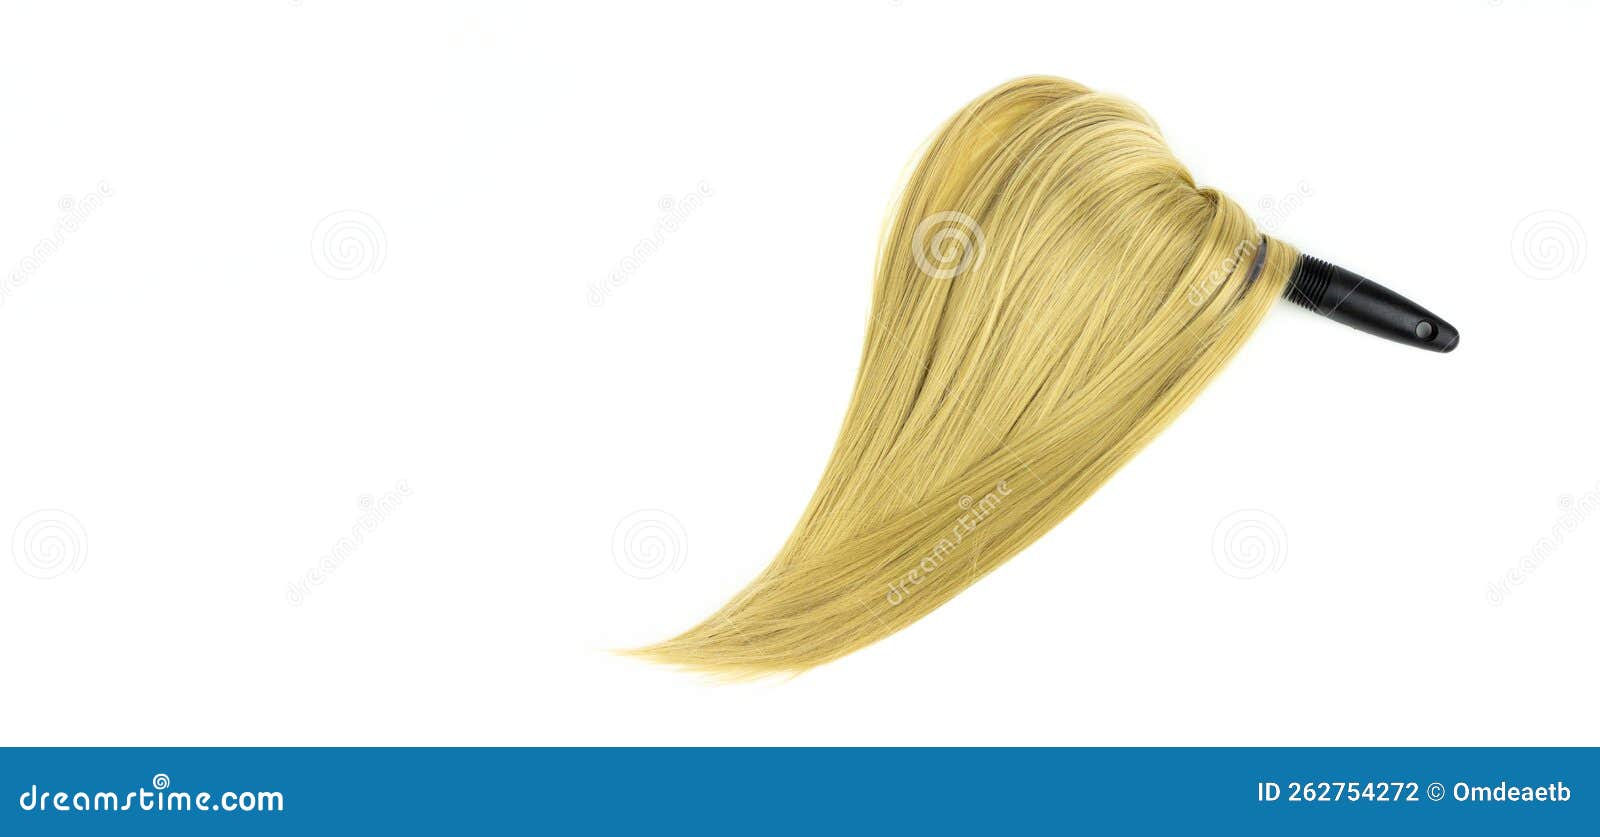 Long Blond Hair and Mustache Maintenance Tips - wide 6